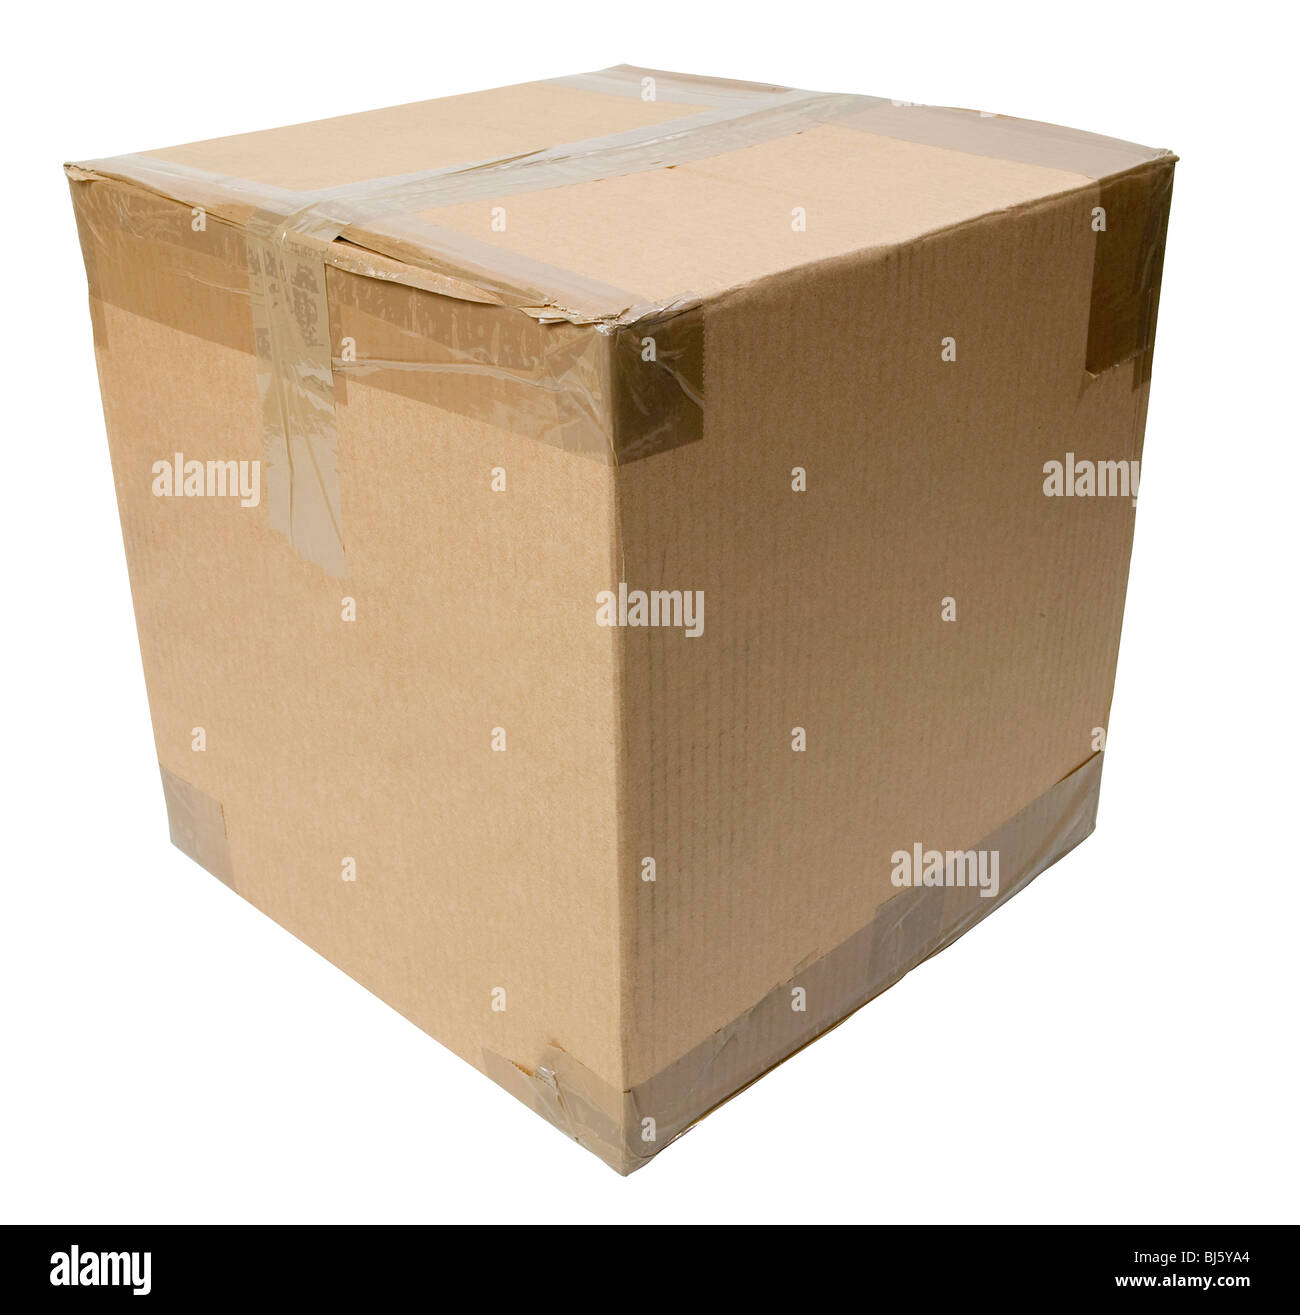 A sealed, square-shaped, cardboard box. Already cutout for easy placement. Stock Photo